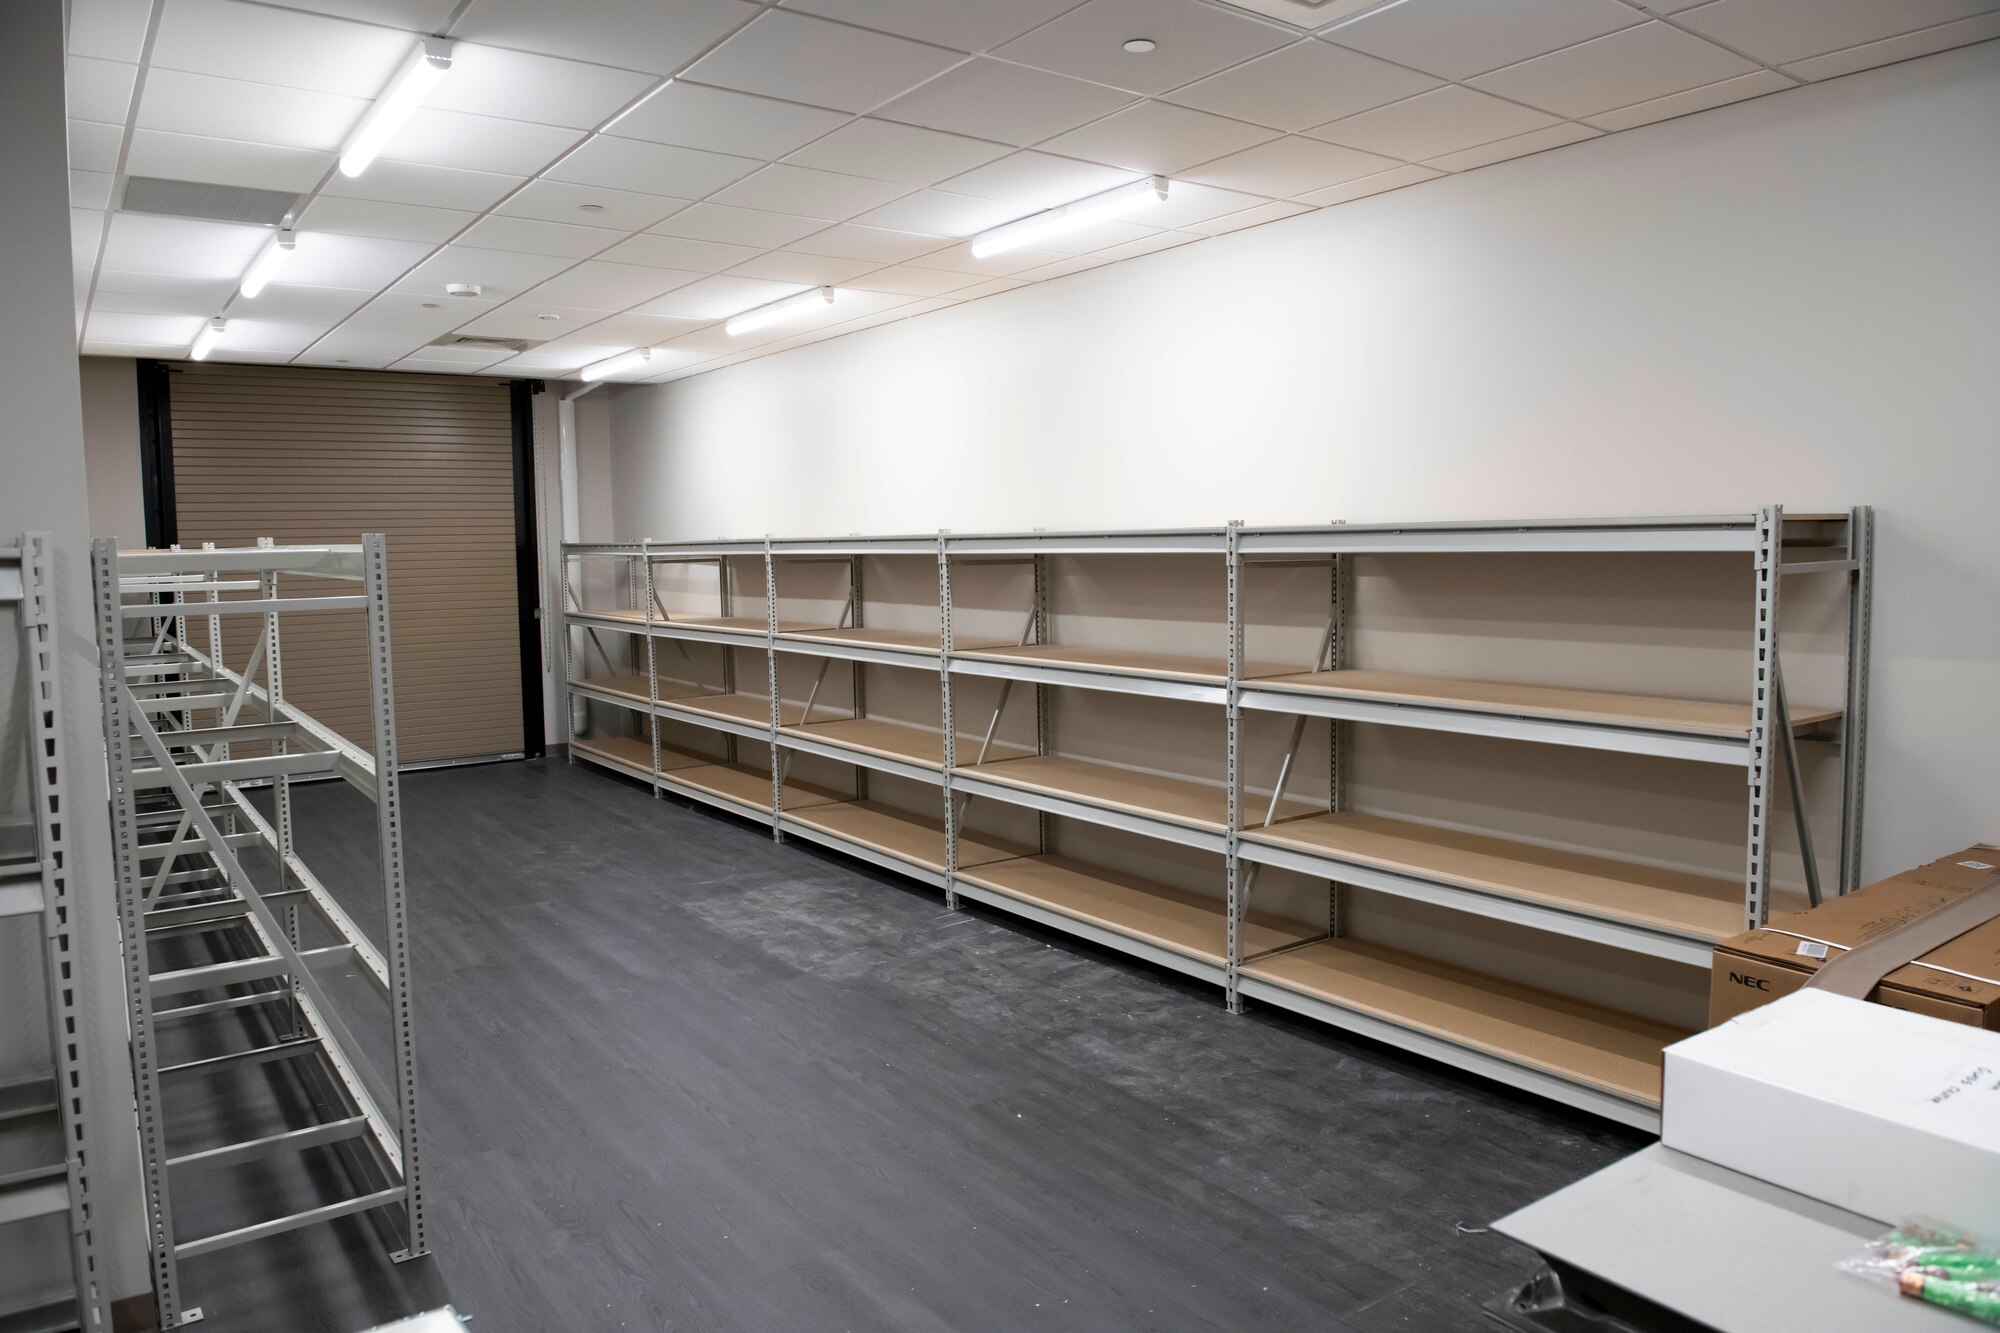 Picture of storage room with loading bays.